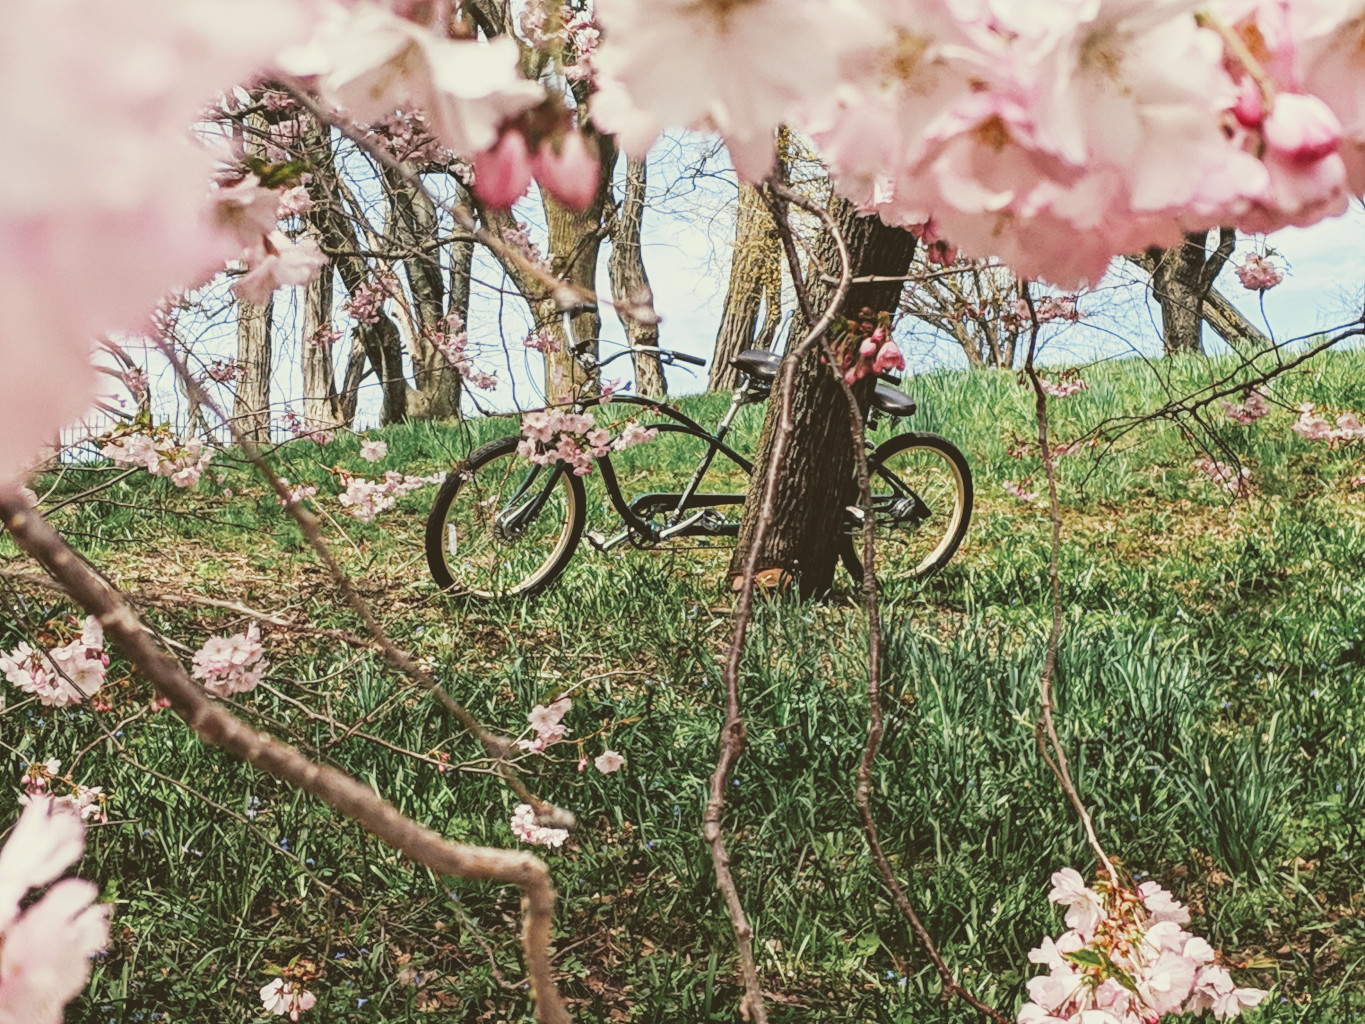 Blooming Magnificient – A Bicycle Built for Two